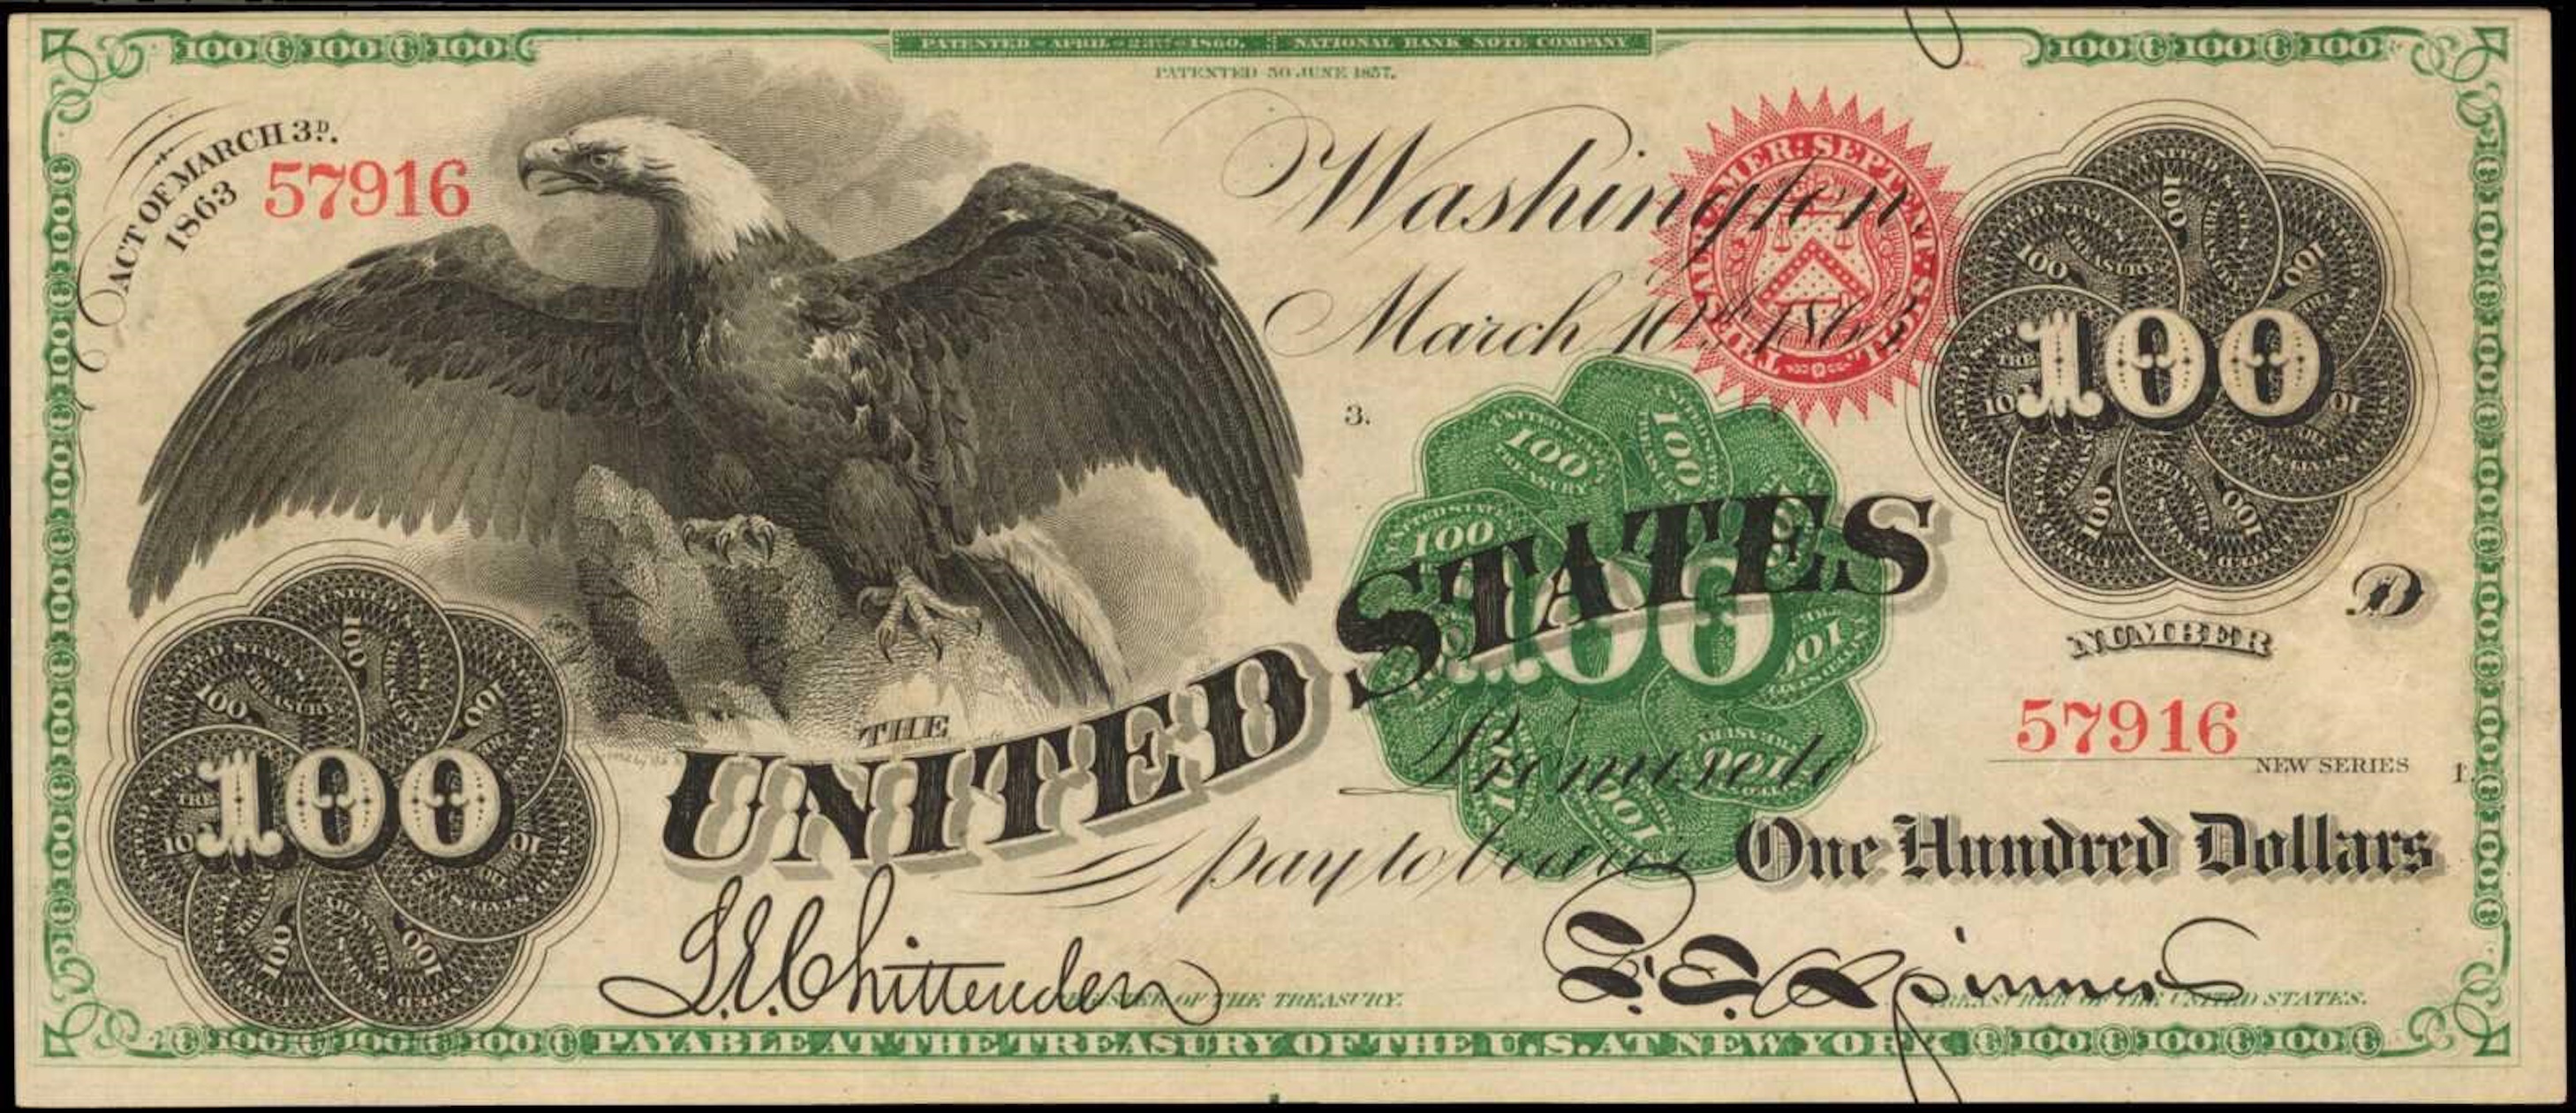 The most valuable individual U.S. paper money sold at auction in 2020 was this Civil War-era 1863 $100 Legal Tender Note for $432,000. Photo courtesy of Stack’s Bowers Galleries.